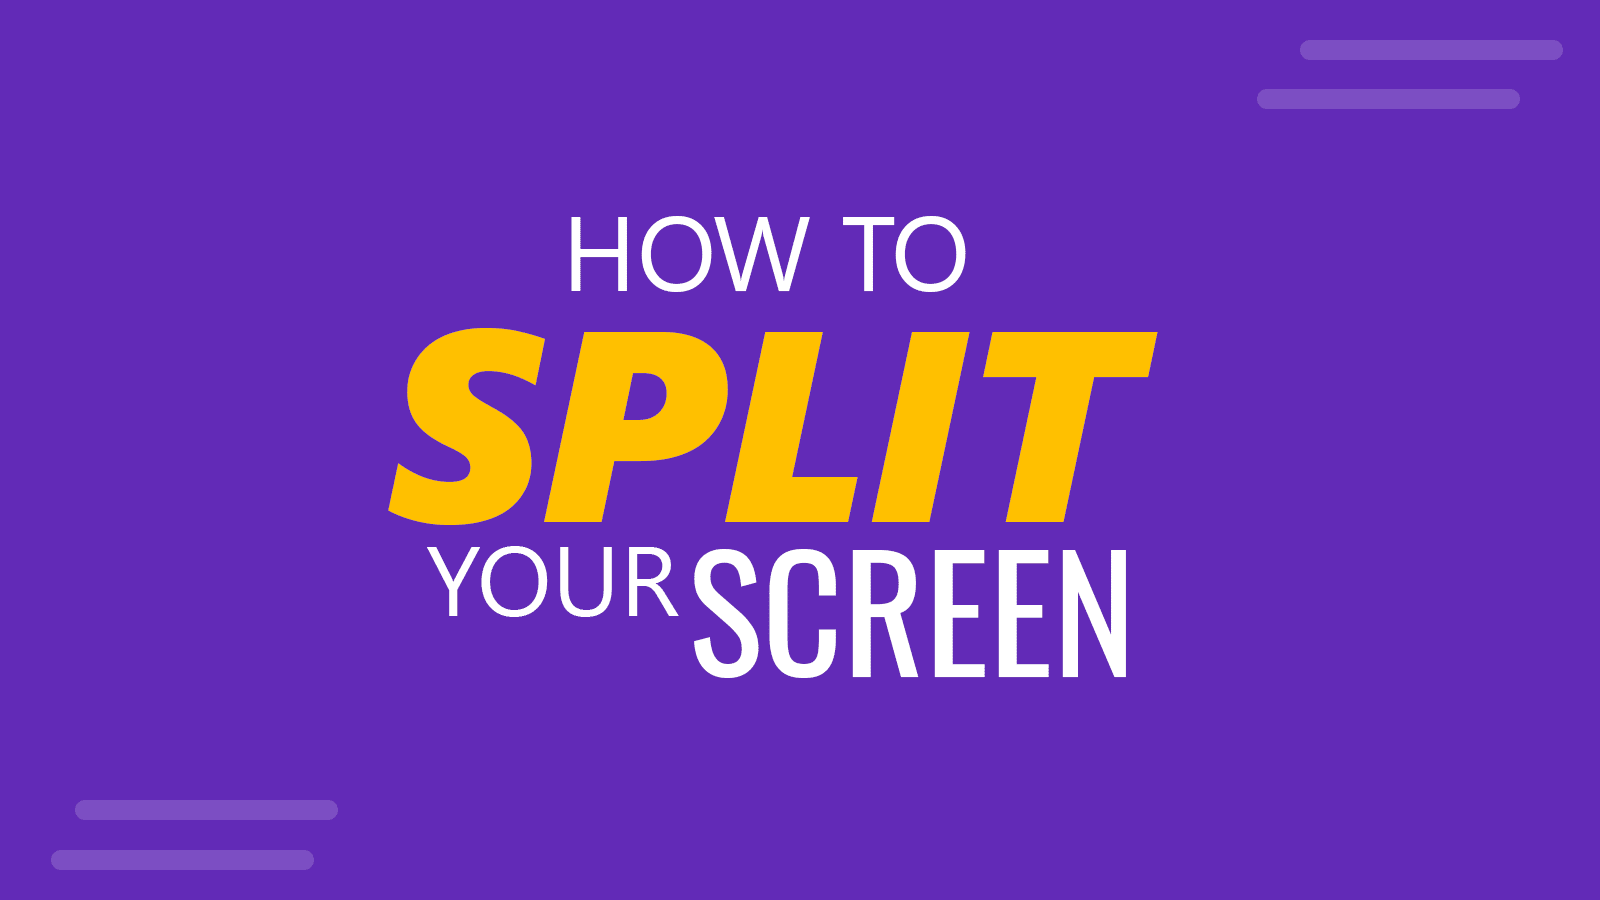 How to Split your Screen? A Step-by-Step Guide